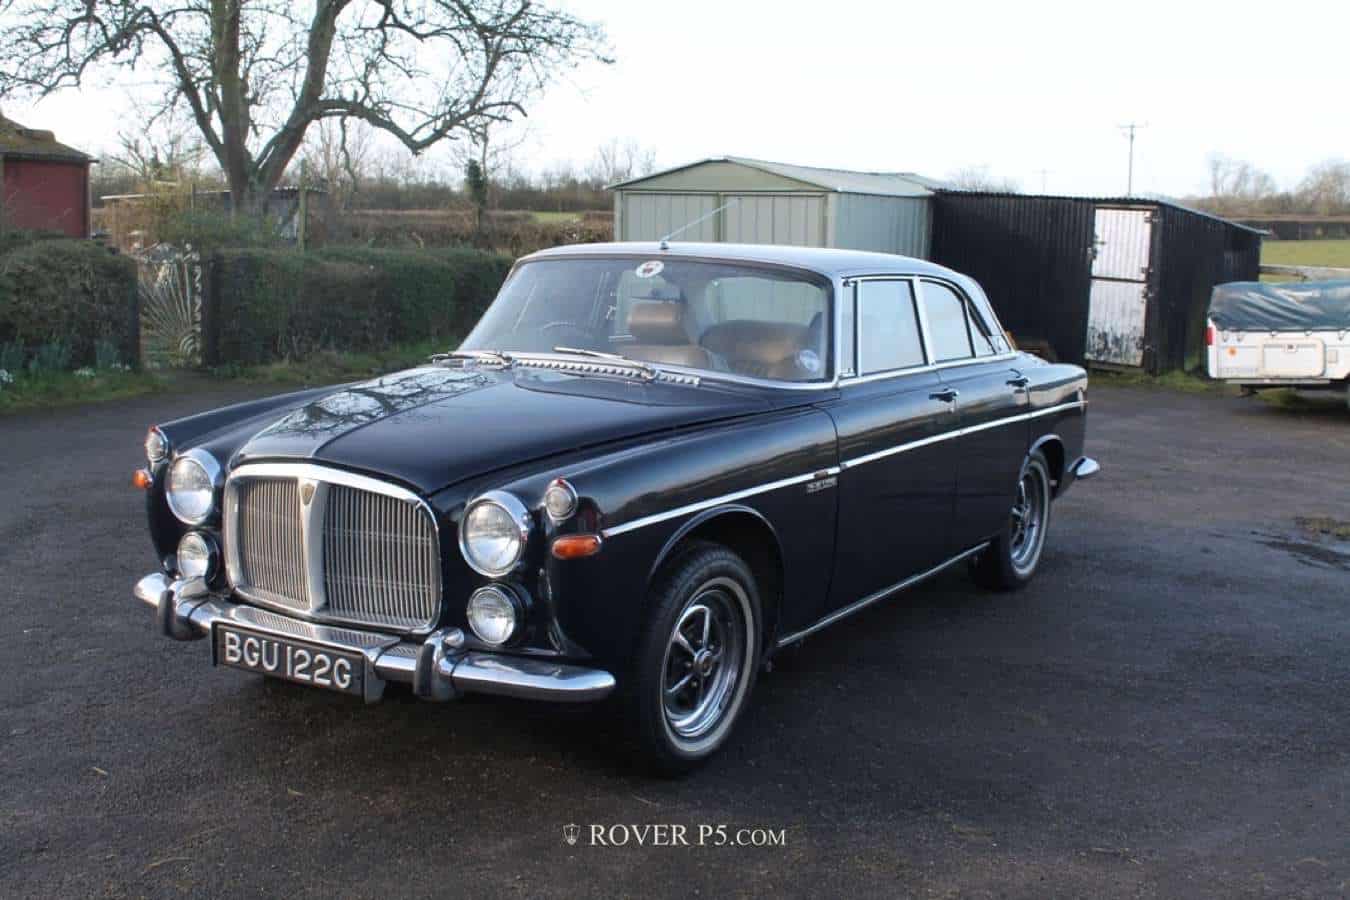 Buying a Rover P5B Coupe